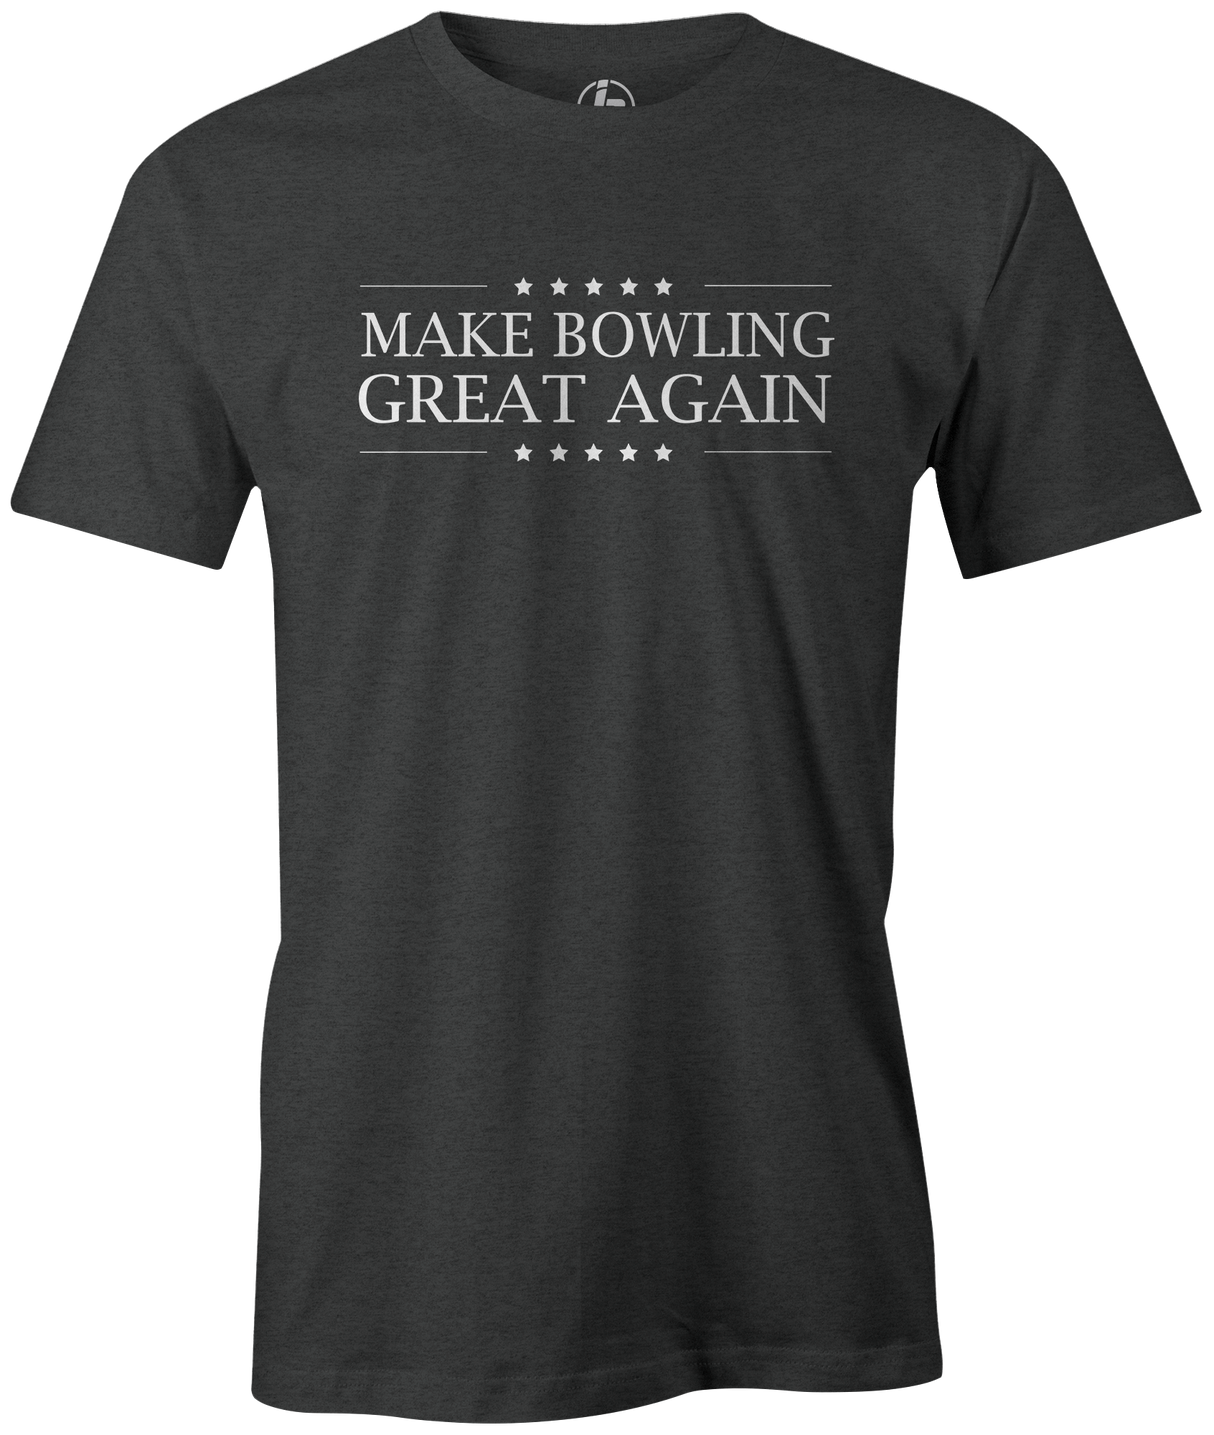 We are by no means getting political here, but we do believe in bowling being great! Lets get the sport of bowling back to where it should be. Help do your part in making bowling great again by grabbing this cool bowling t-shirt! tshirt, shirt, tee, tee-shirt, tees. Trump. Novelty. 